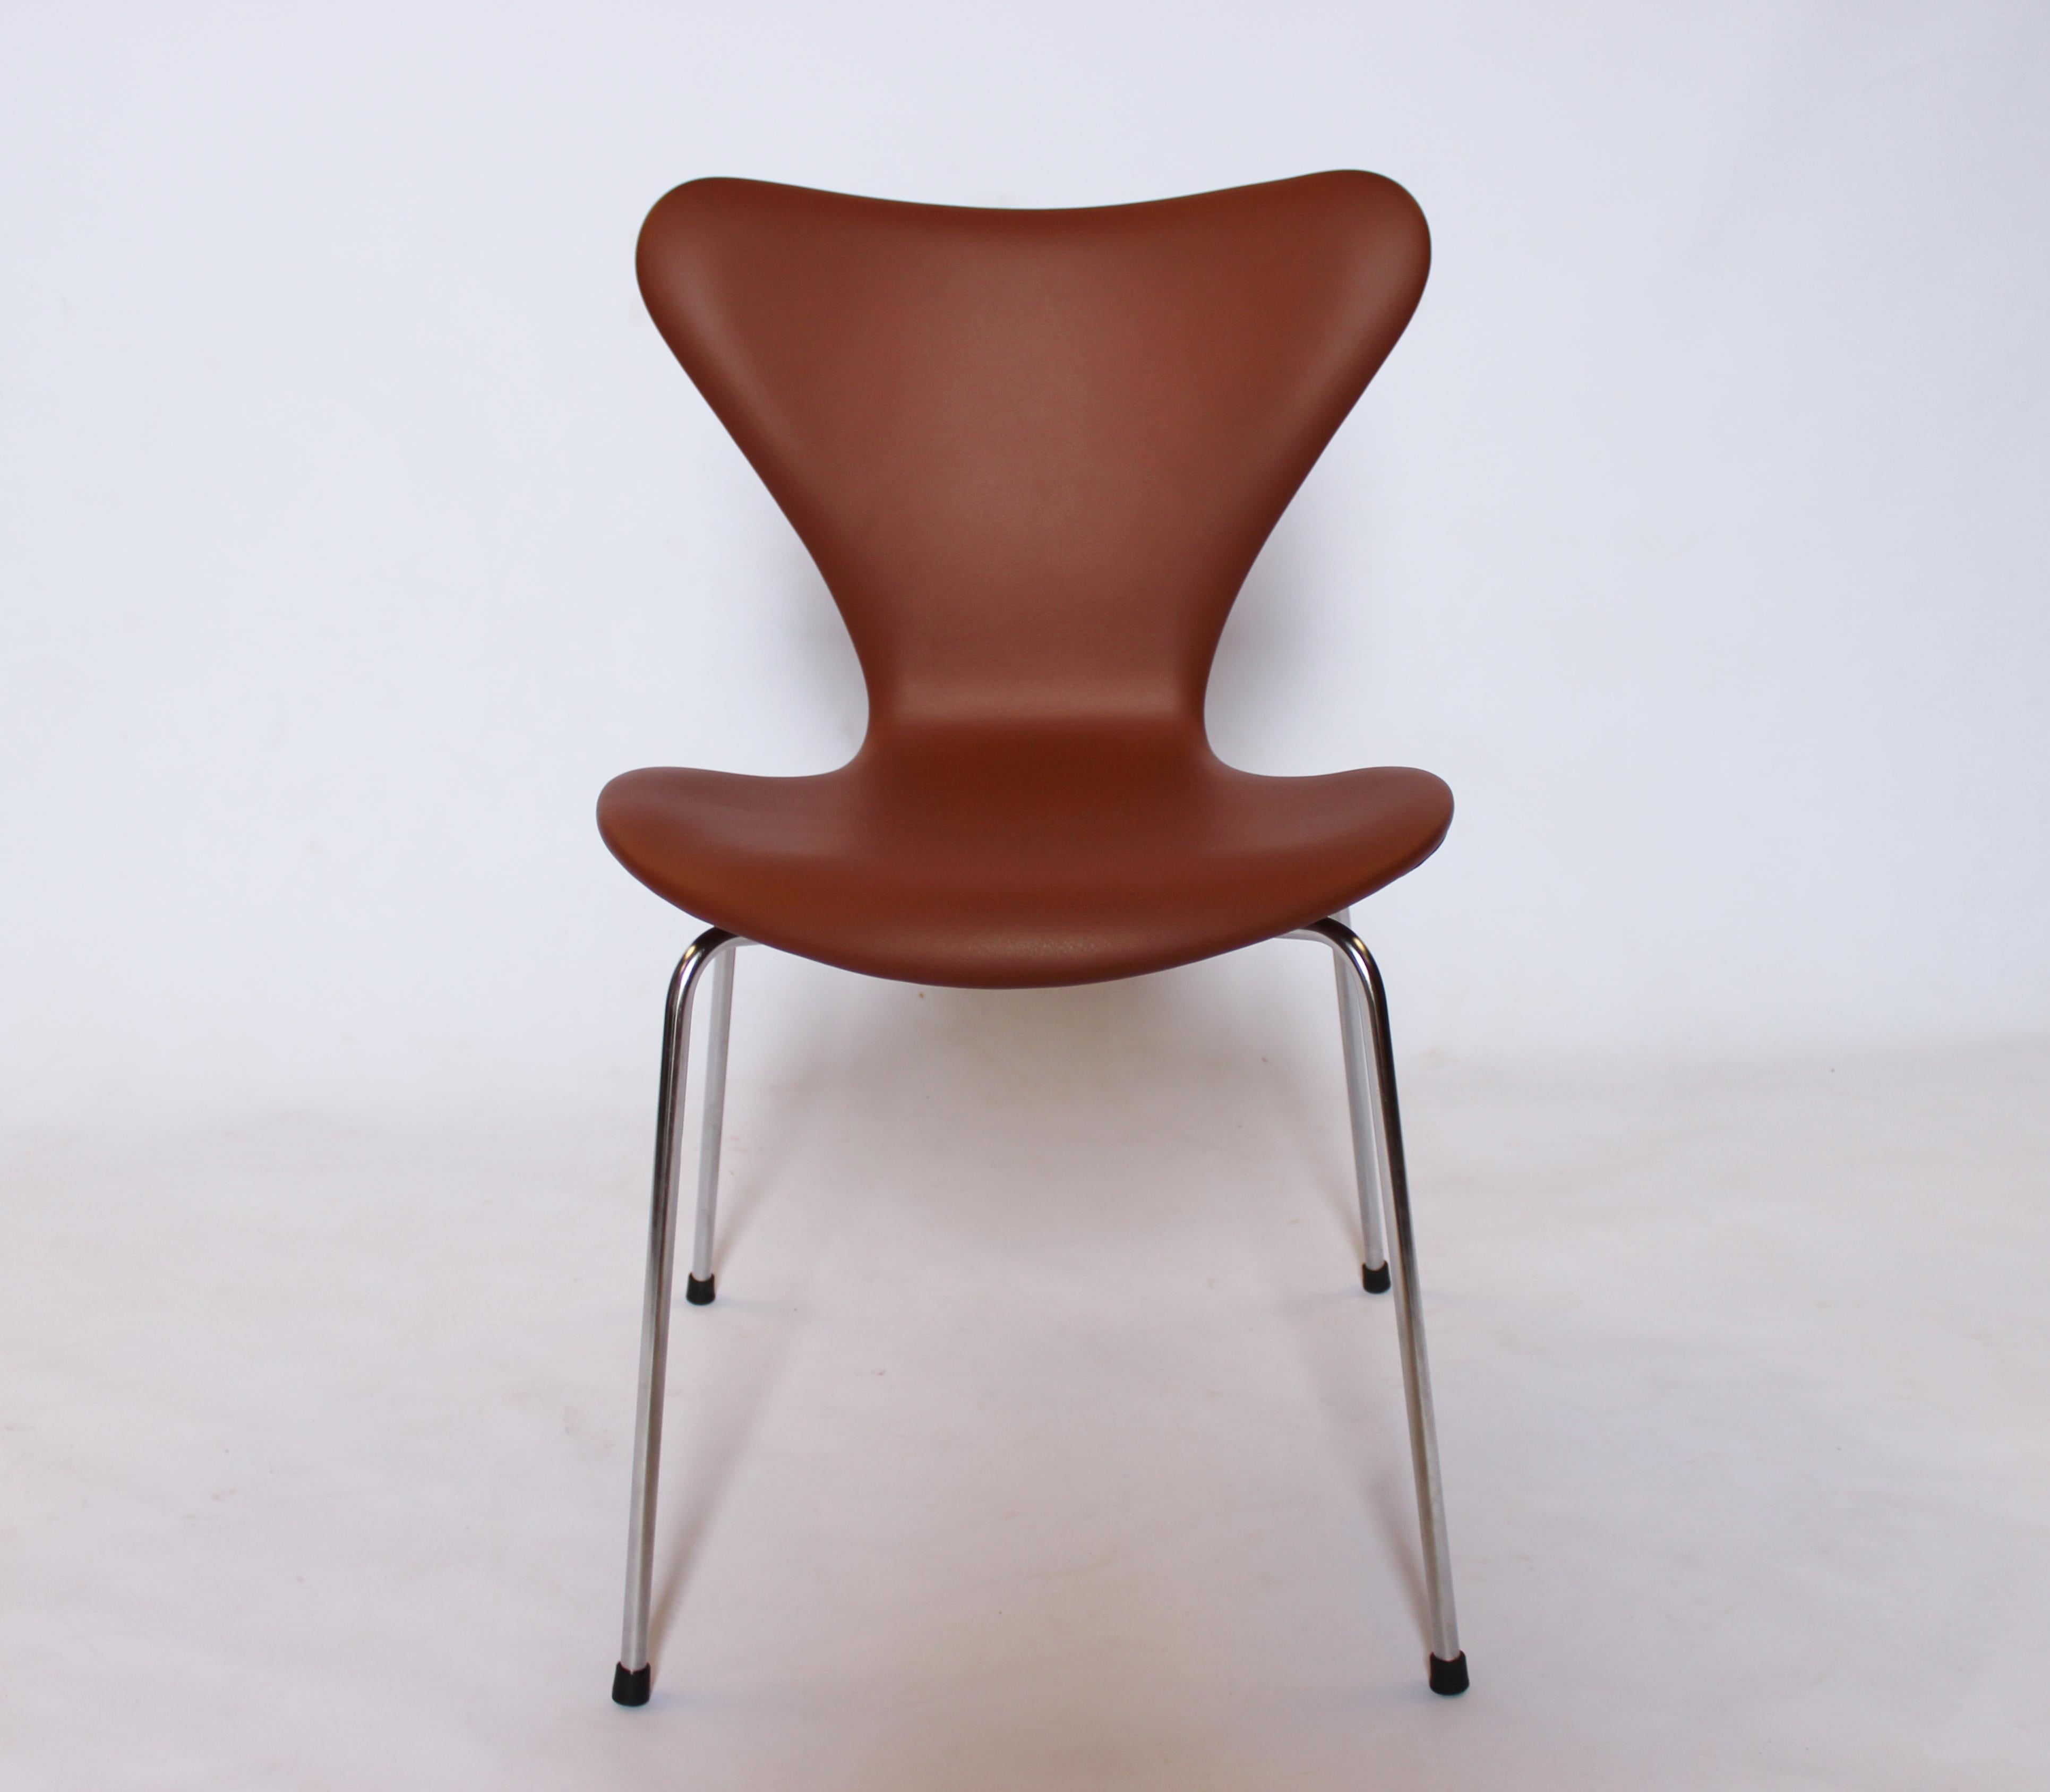 The set of four Seven chairs, model 3107, designed by Arne Jacobsen and manufactured by Fritz Hansen in 1967, is a highly desirable and iconic collection of chairs.

Arne Jacobsen's model 3107, also known as the 